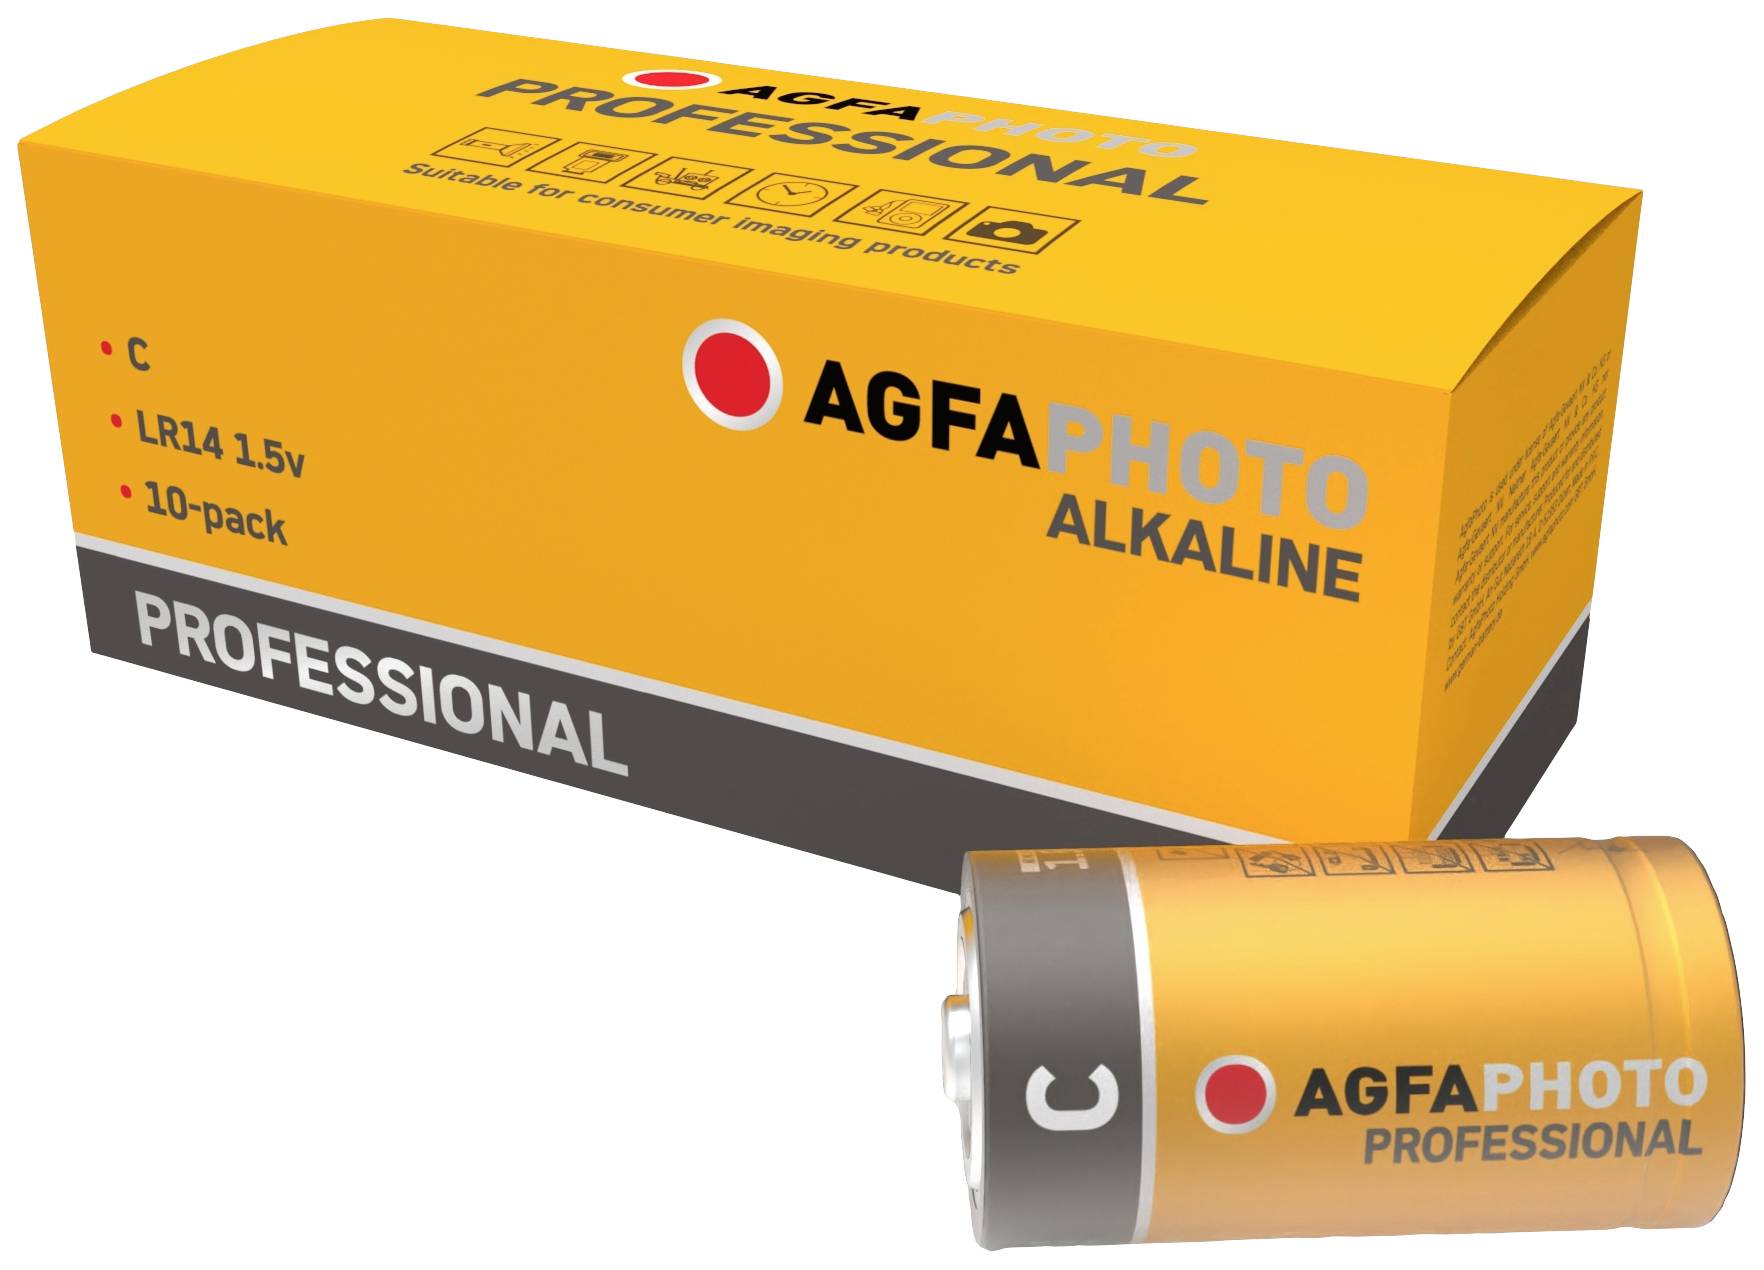 AGFA Photo Batterie Alkaline Professional -C   Baby     10St.